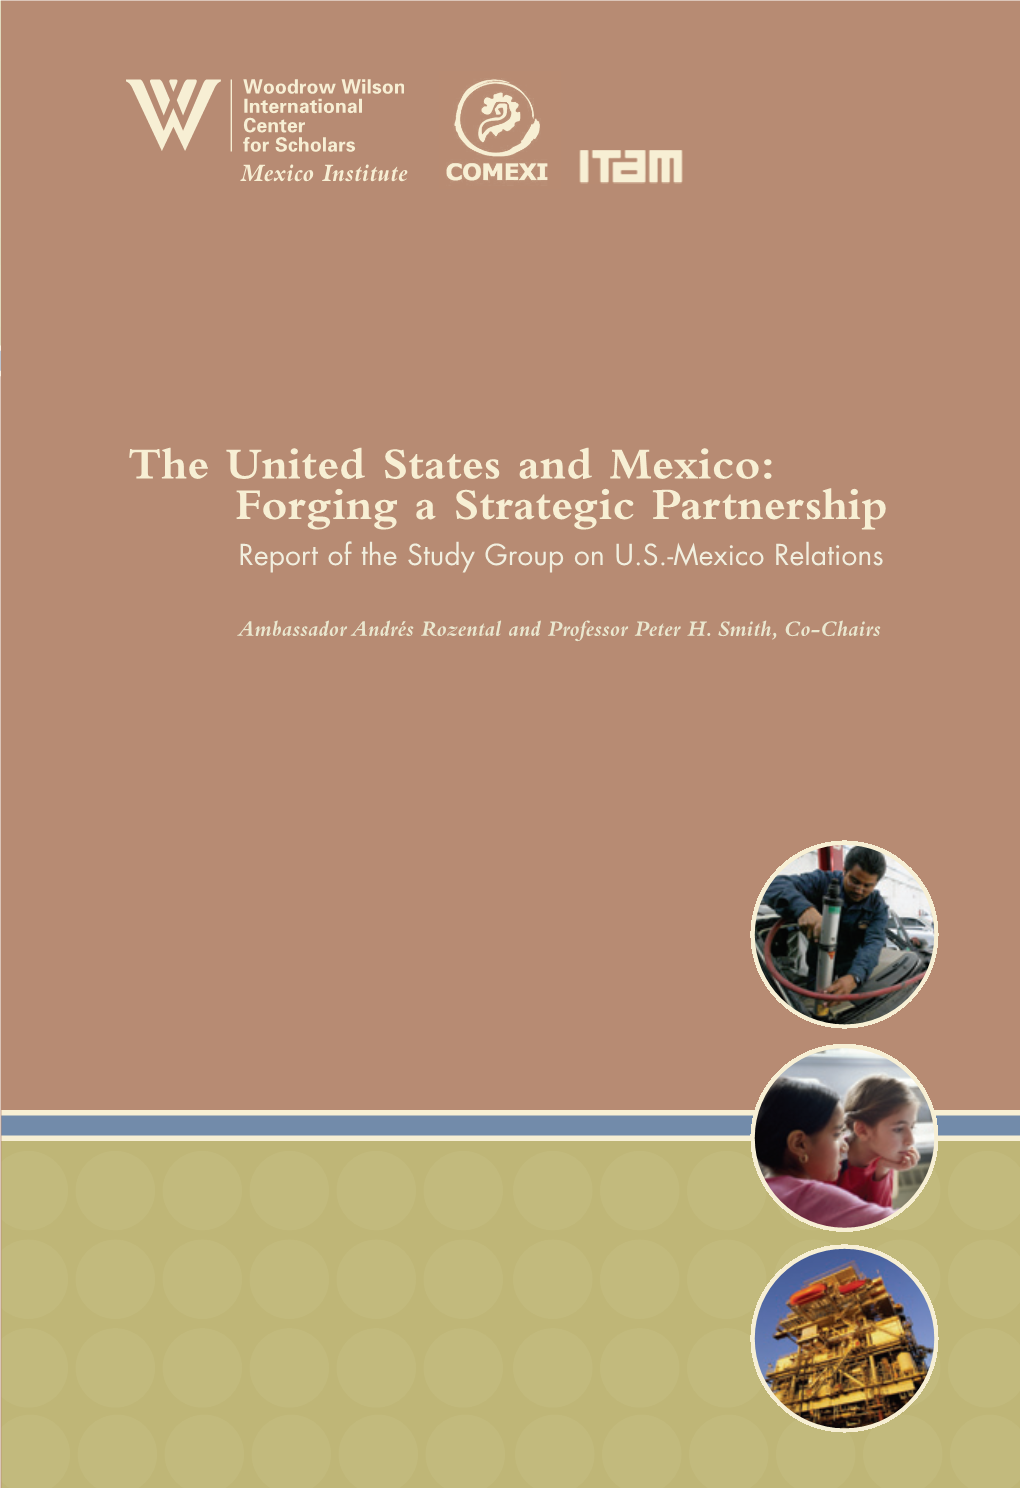 Constru the United States and Mexico: Forging a Strategic Partnership